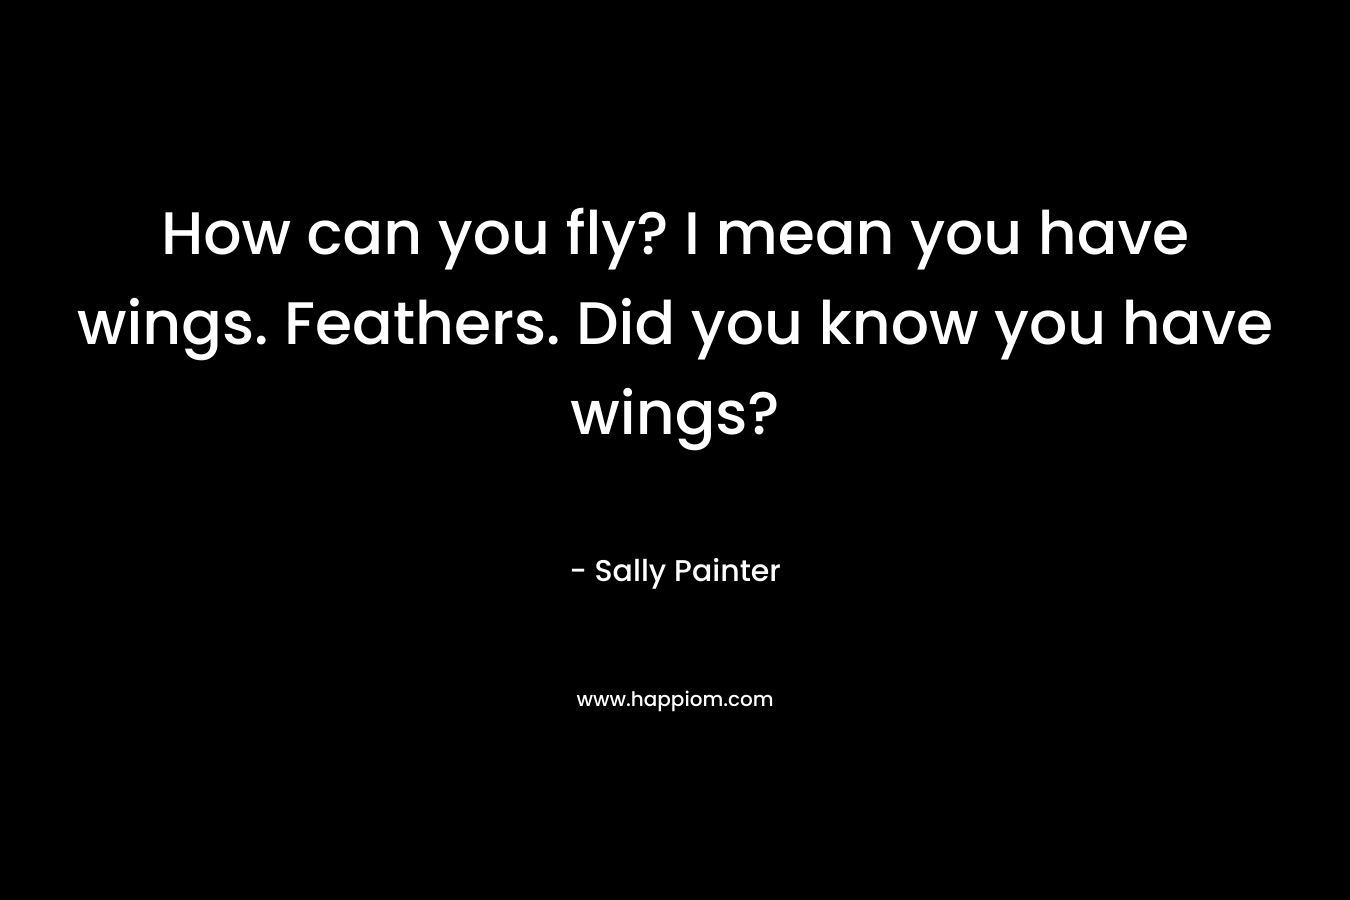 How can you fly? I mean you have wings. Feathers. Did you know you have wings?